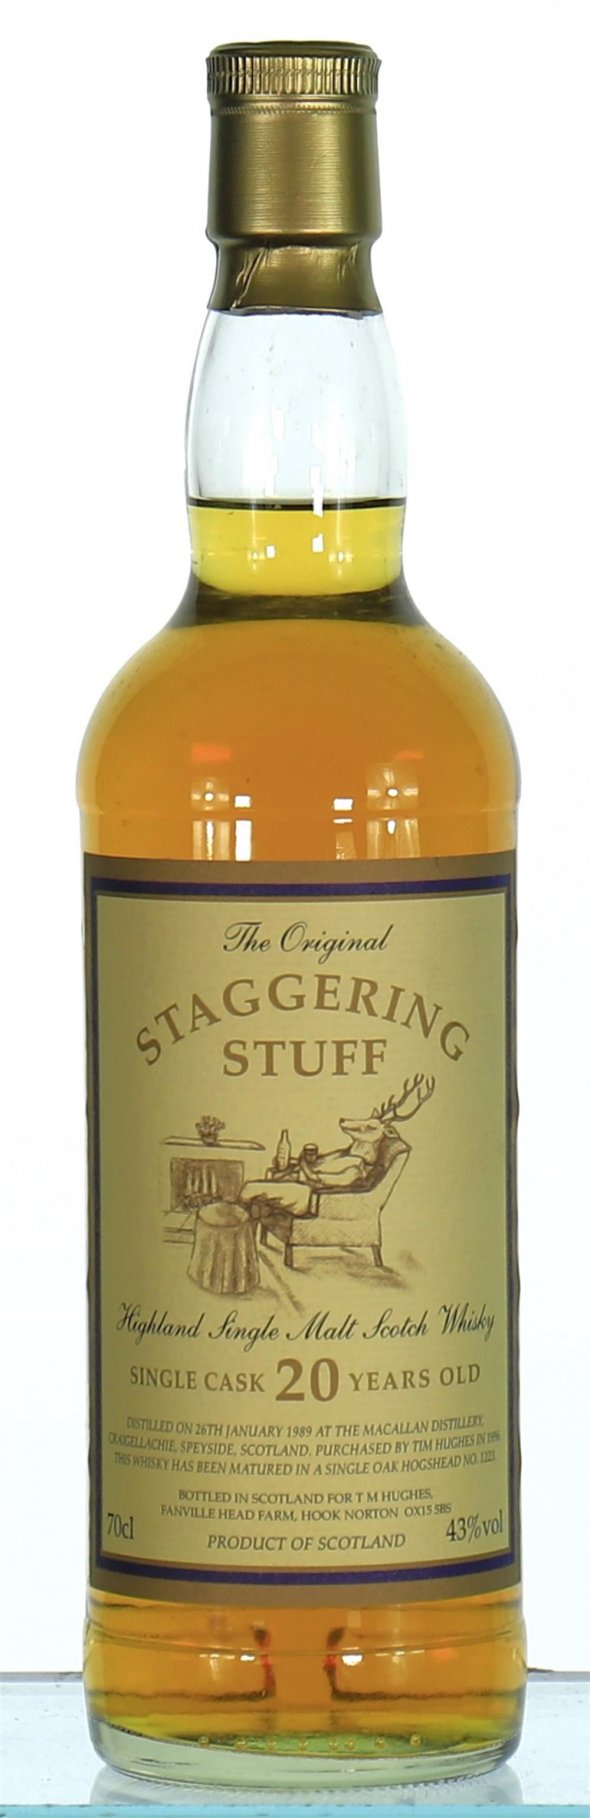 Staggering Stuff Malt Whisky, 20 Years, Distilled by the Macallan Distillery